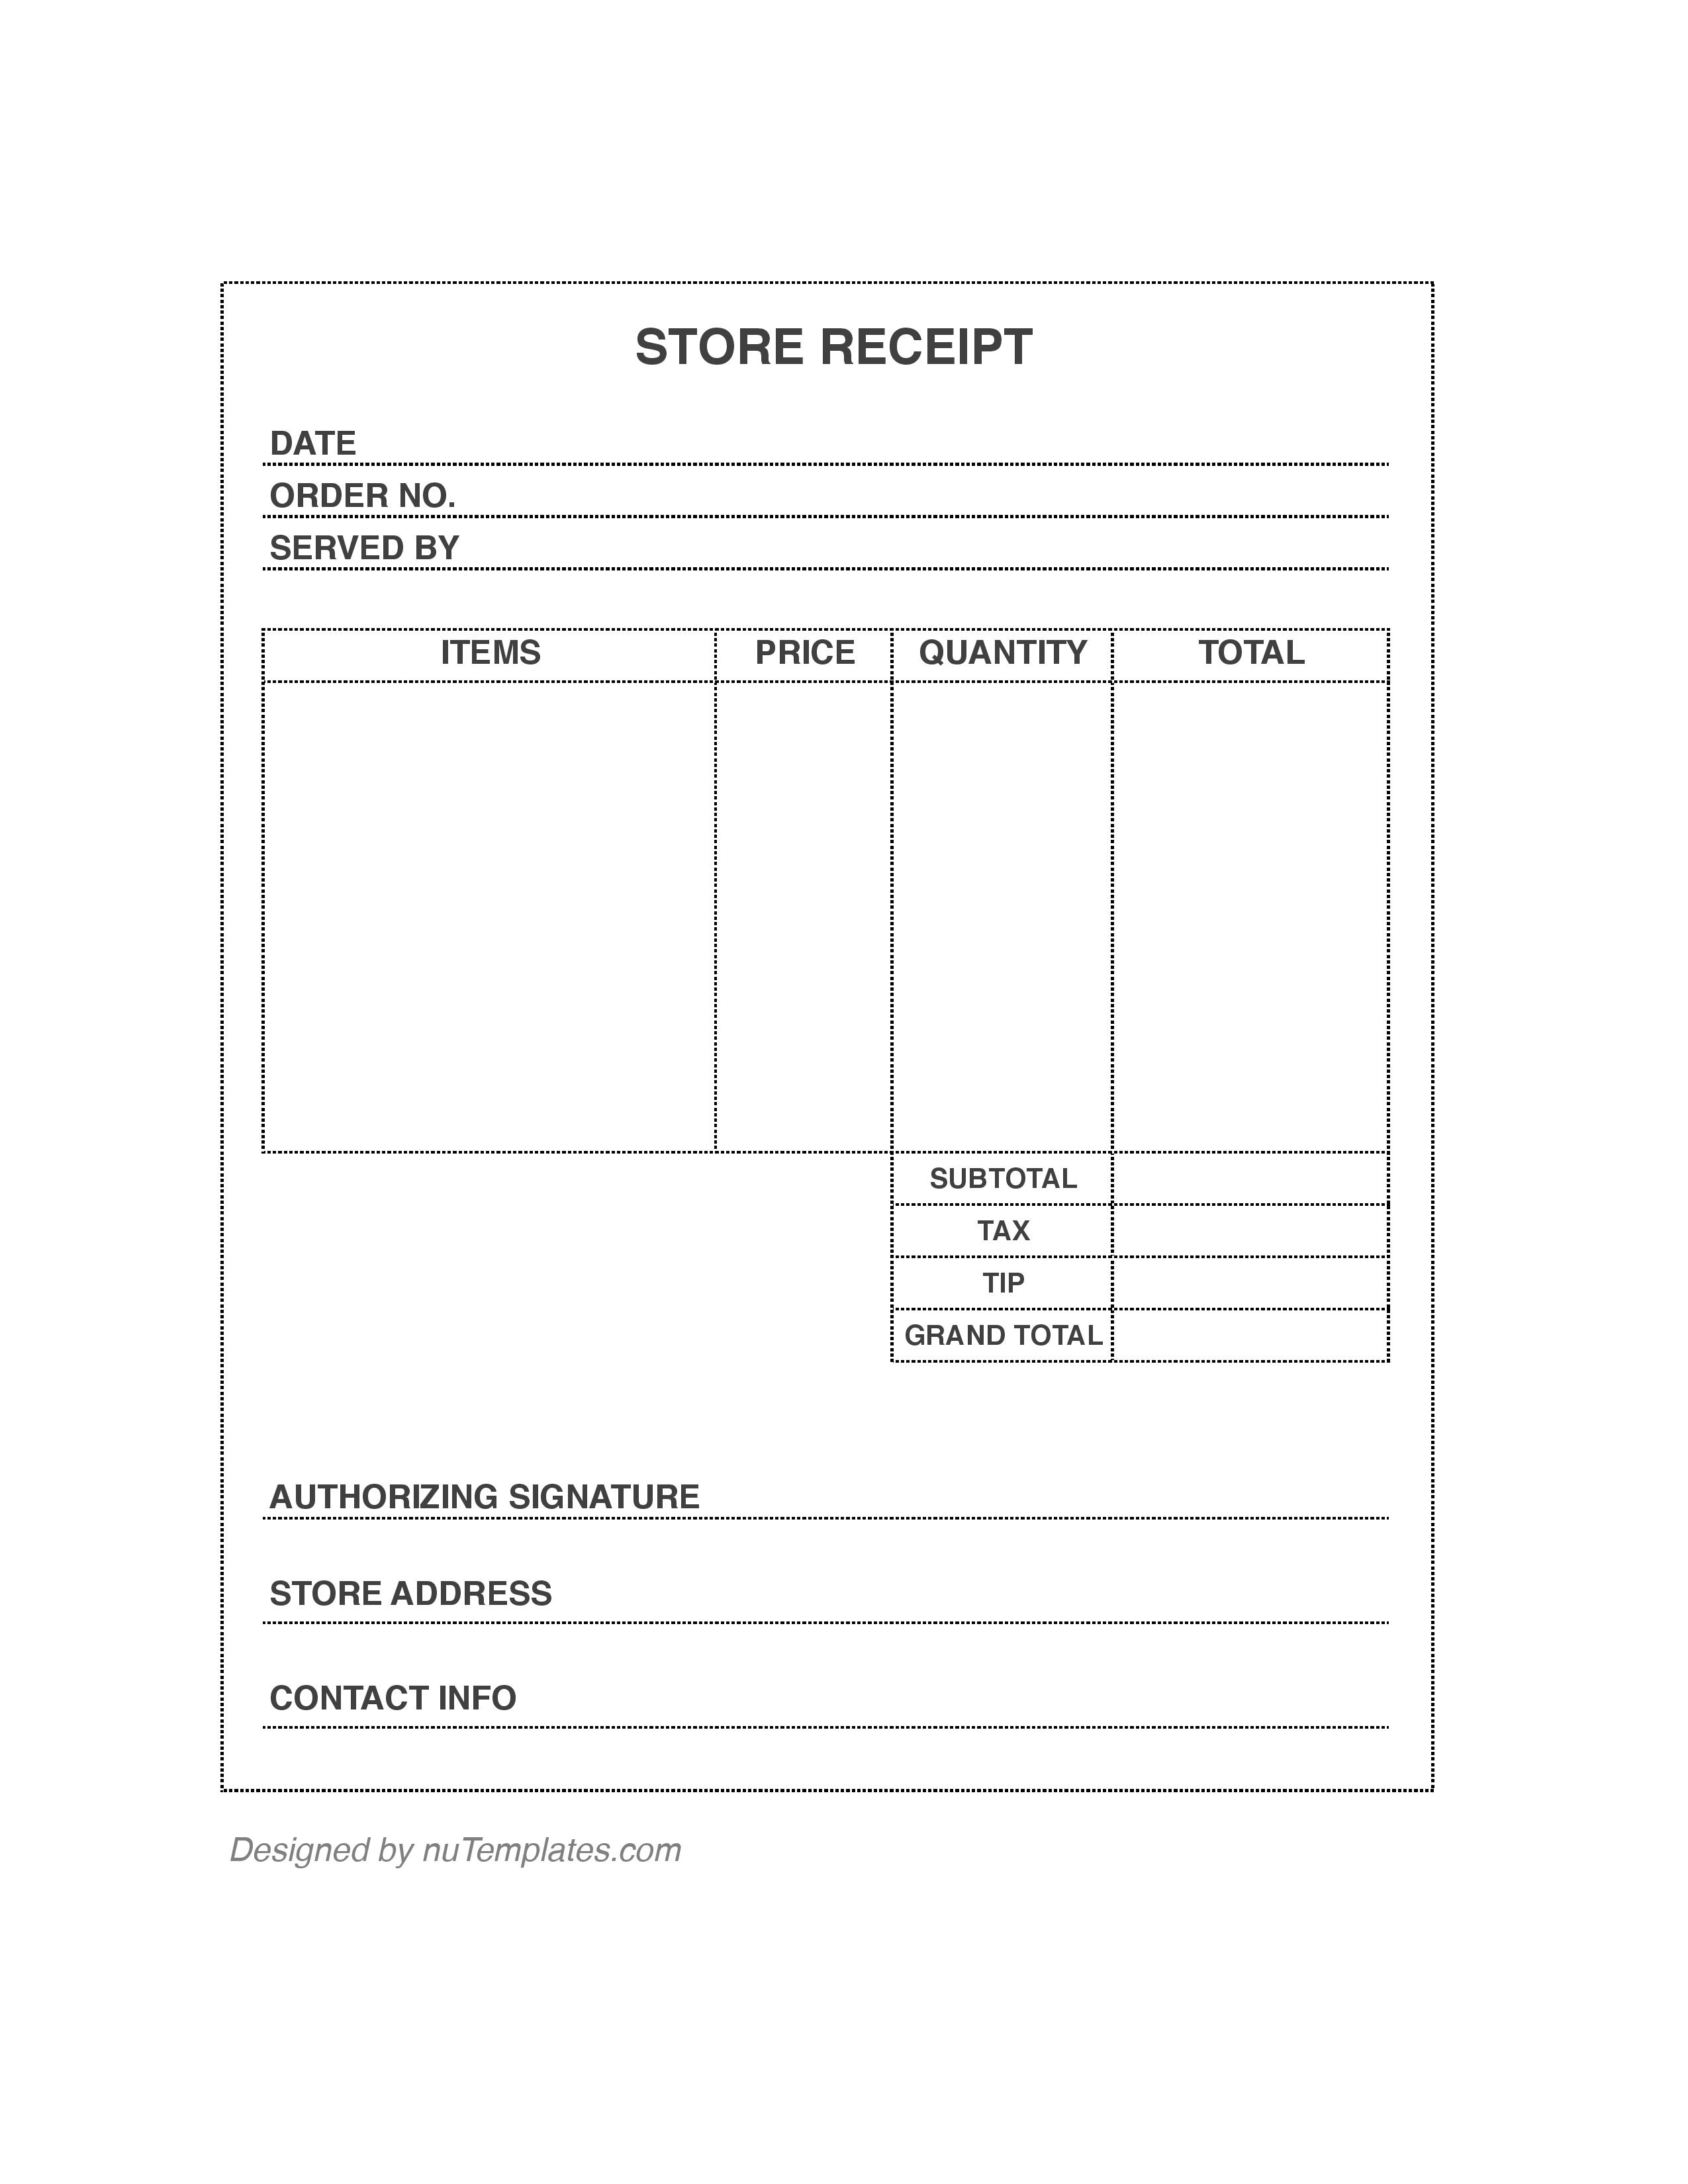 store-receipt-template-store-receipts-nutemplates